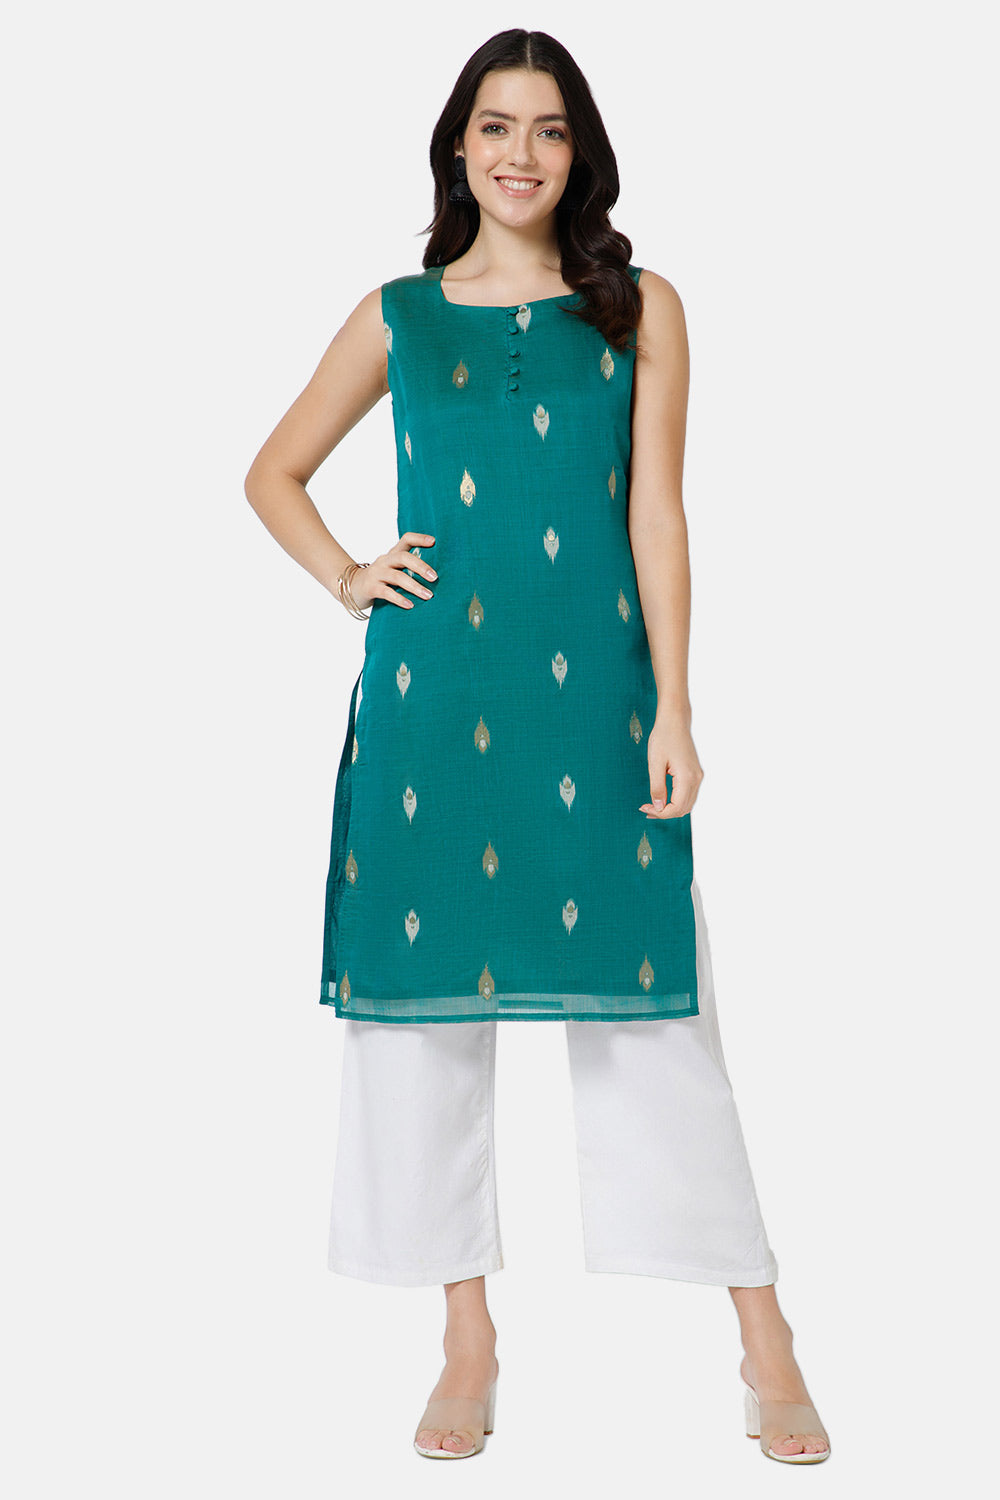 Rachna Poly Linen 3D Printed Work Zoom-3D Catalog Kurti For Women 4, Size:  38, 40, 42, 44 at Rs 450 in Surat